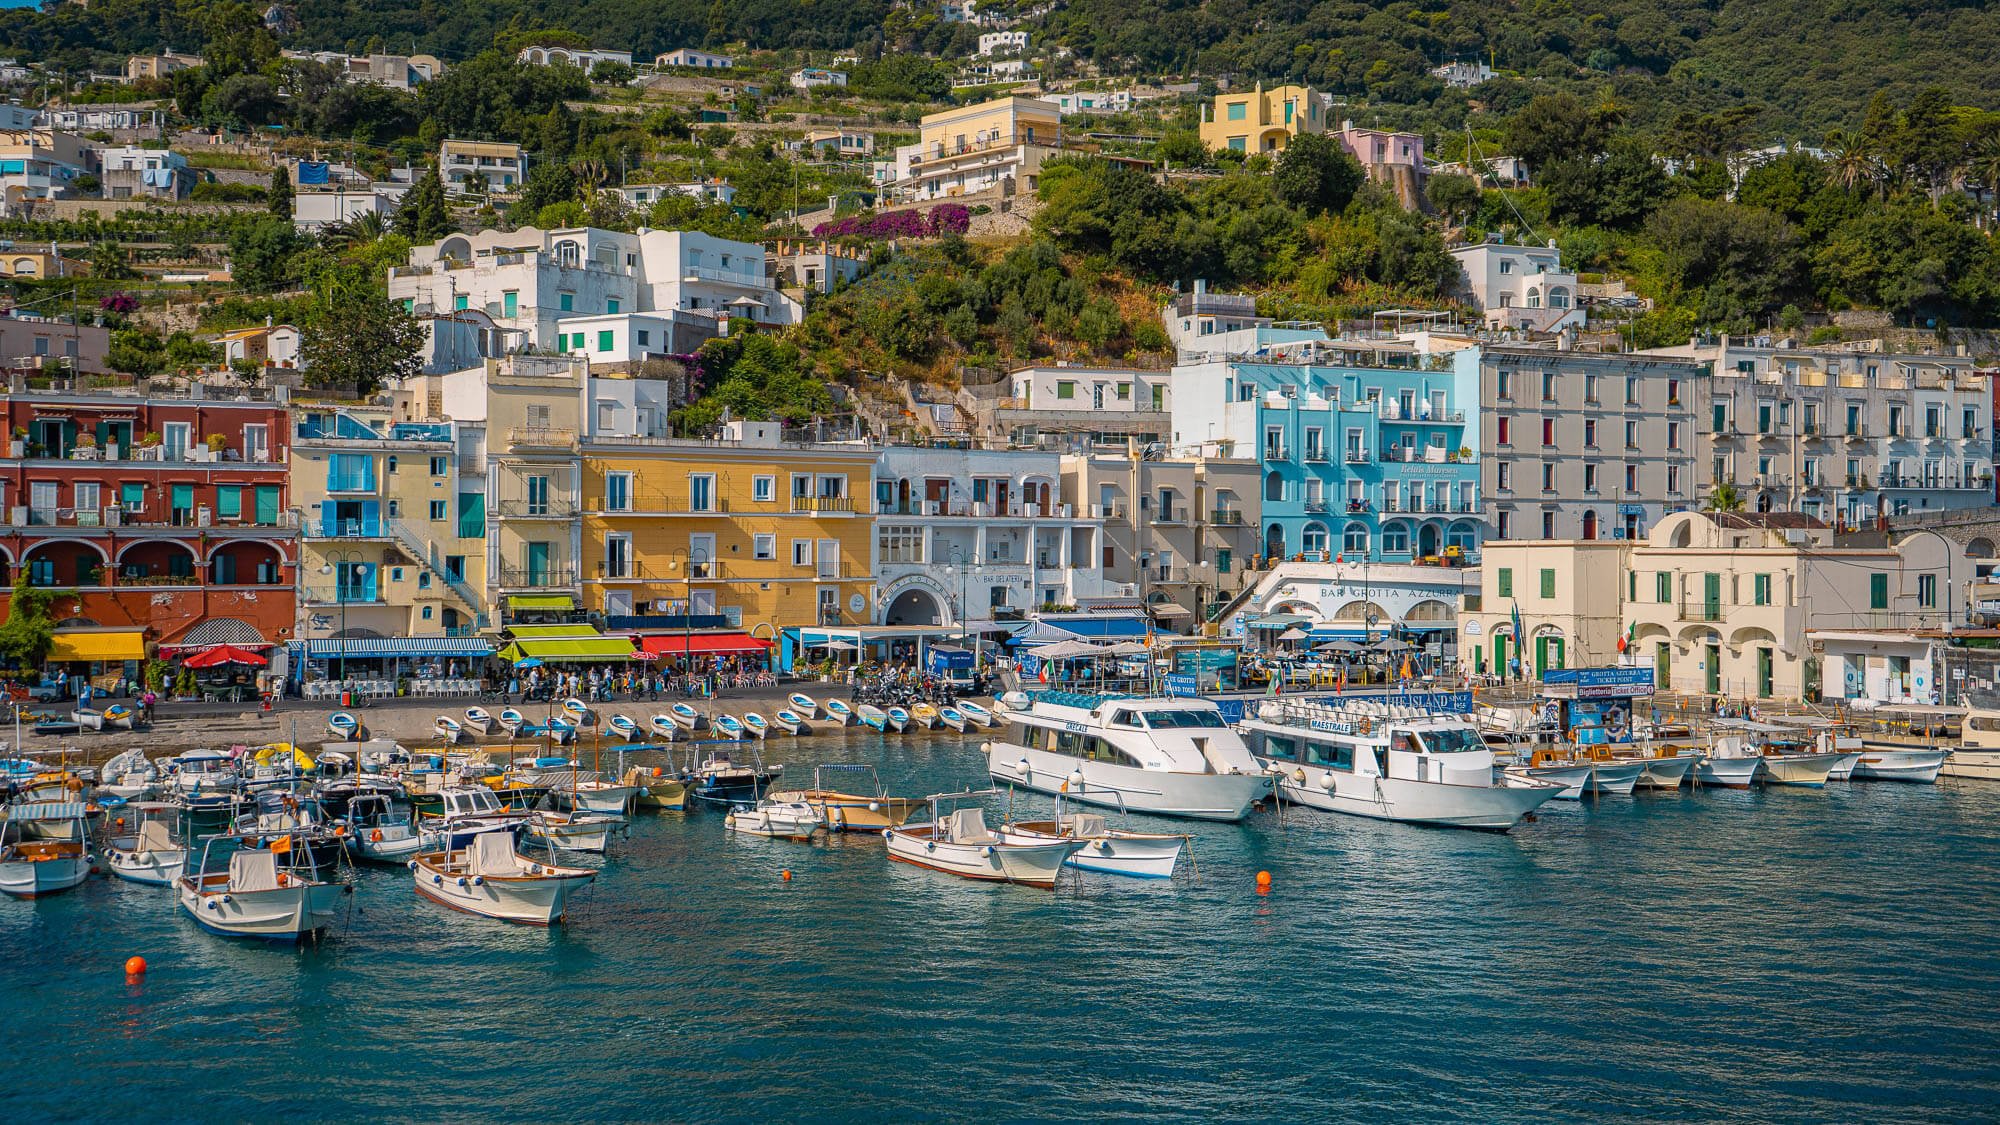 A detailed guide to the best beaches in Capri and the best Capri beach clubs